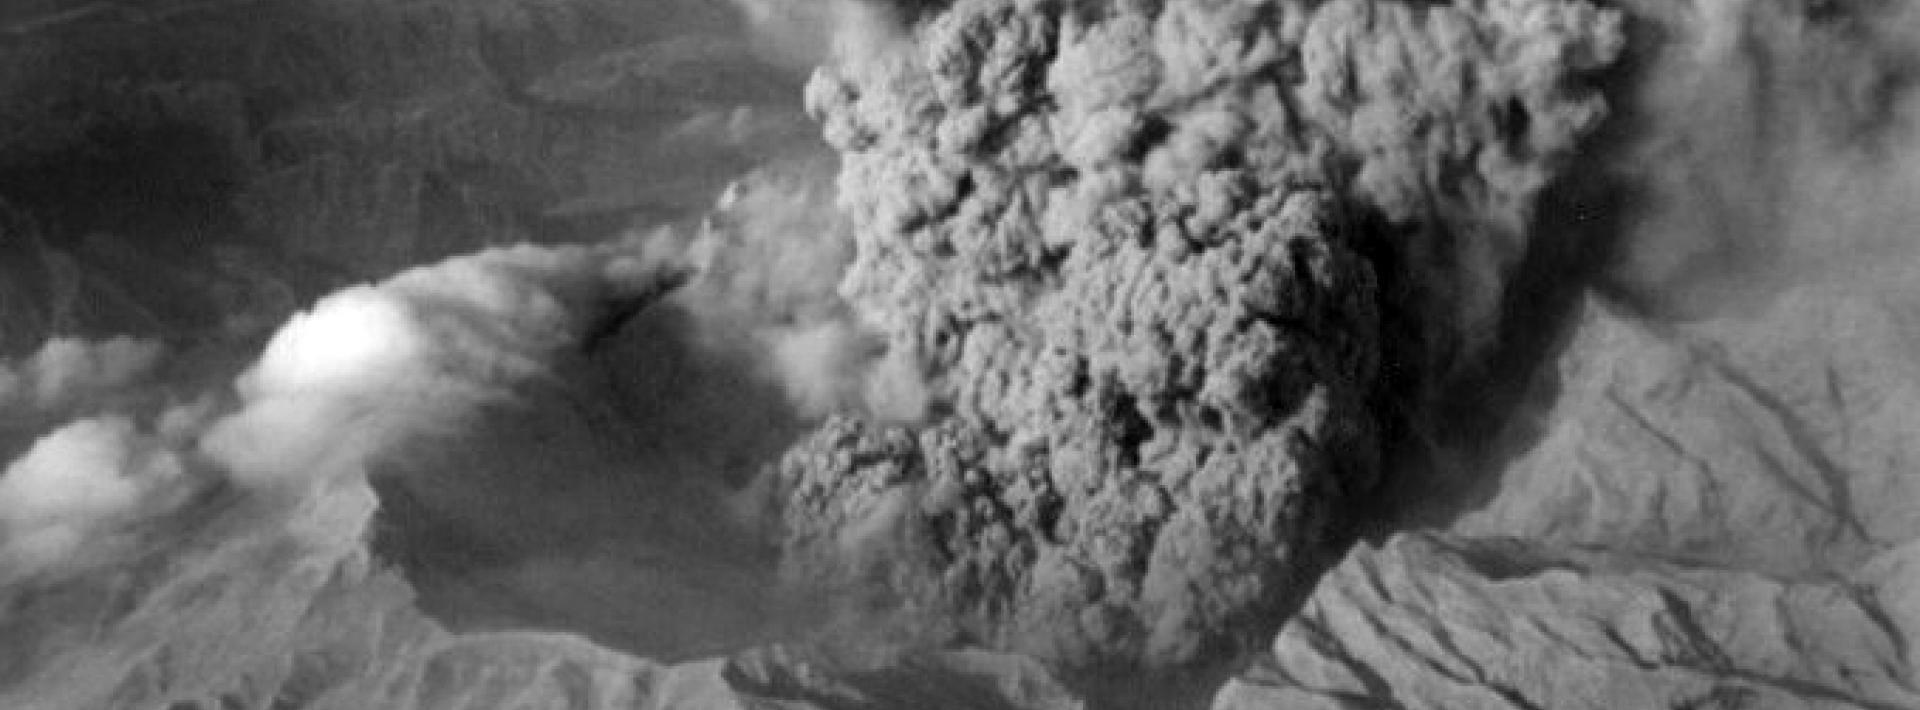 Eruption, Lahar and Resilience: The Aftermath of Mt. Pinatubo Eruption in the Philippines